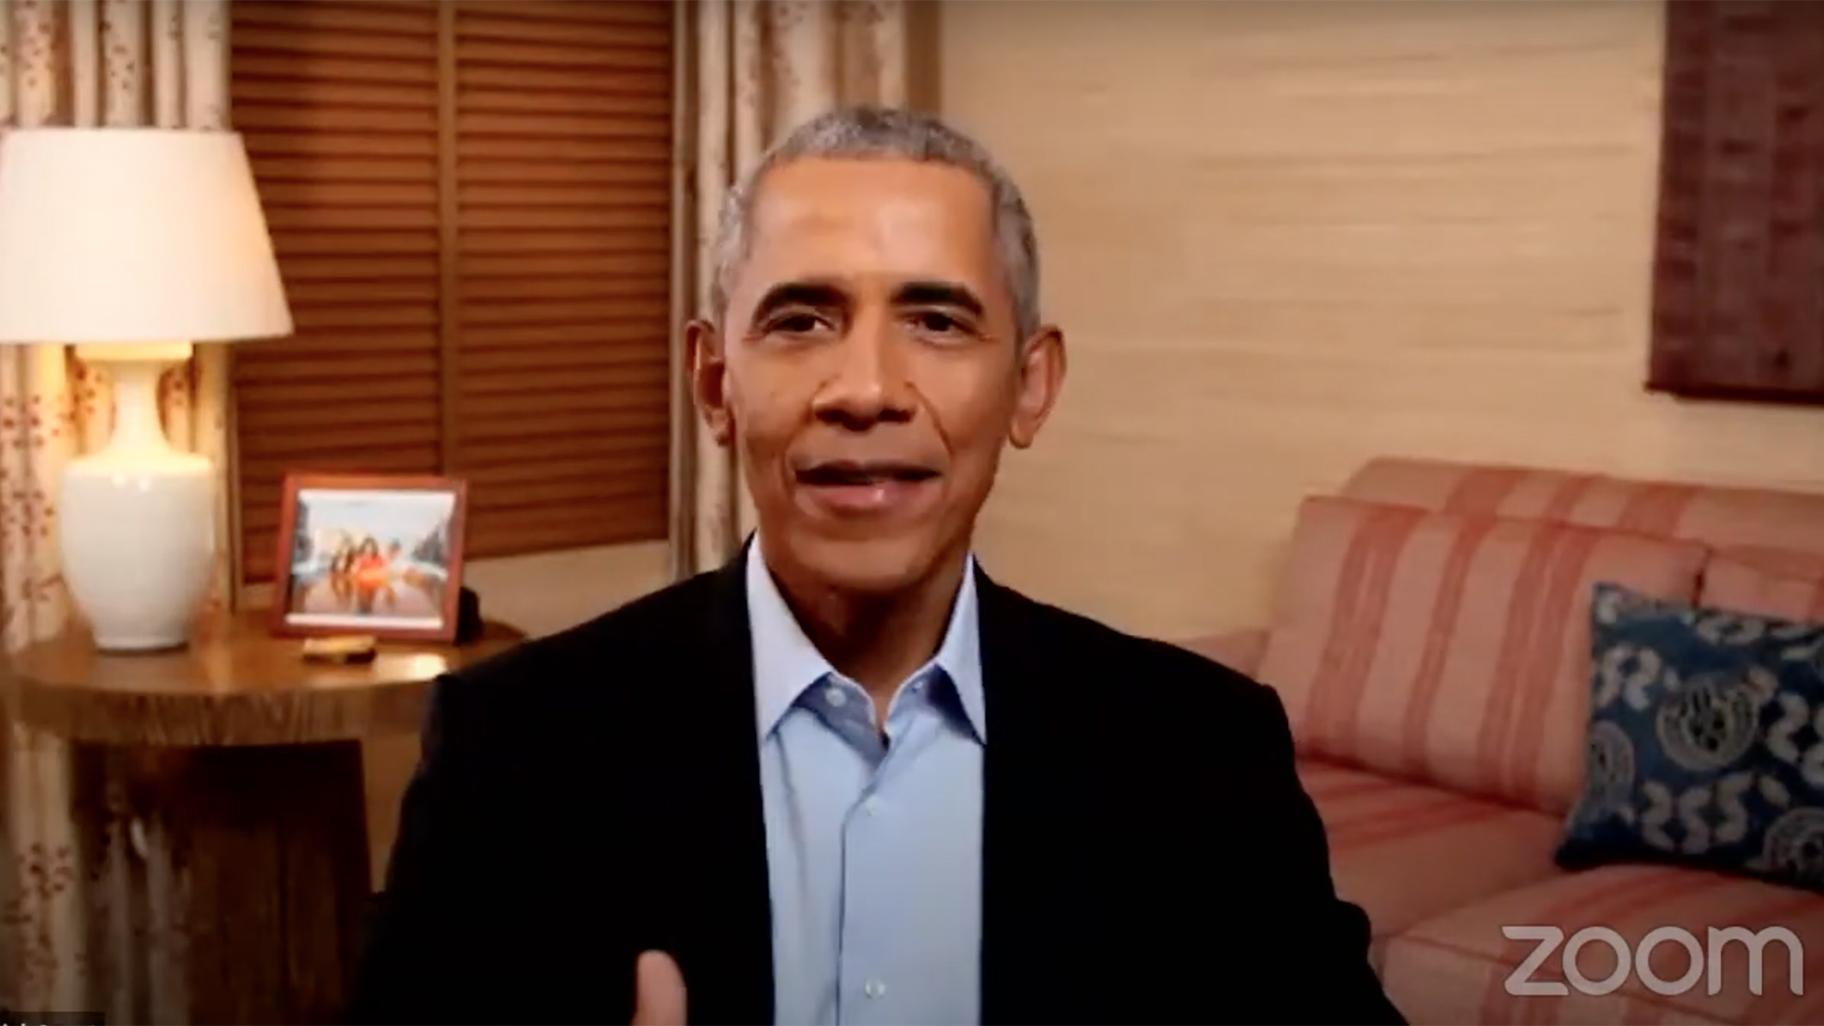 President Barack Obama speaks to thousands of Chicago Public Schools students during a surprise Zoom call Monday, Nov. 23, 2020. (Chicago Public Schools / YouTube)